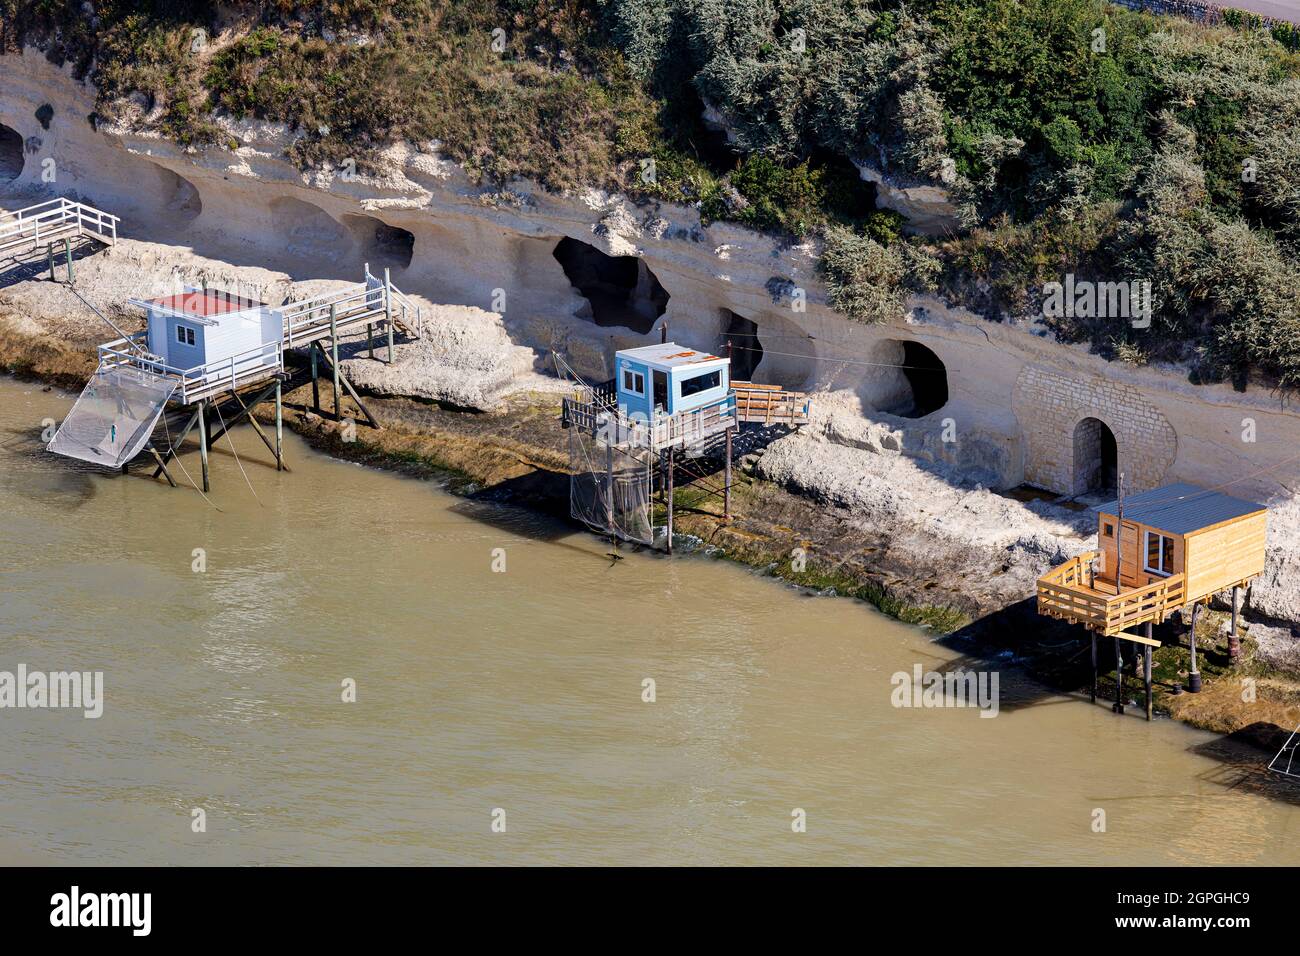 France, Charente Maritime, Meschers sur Gironde, fishery huts and caves (aerial view) Stock Photo